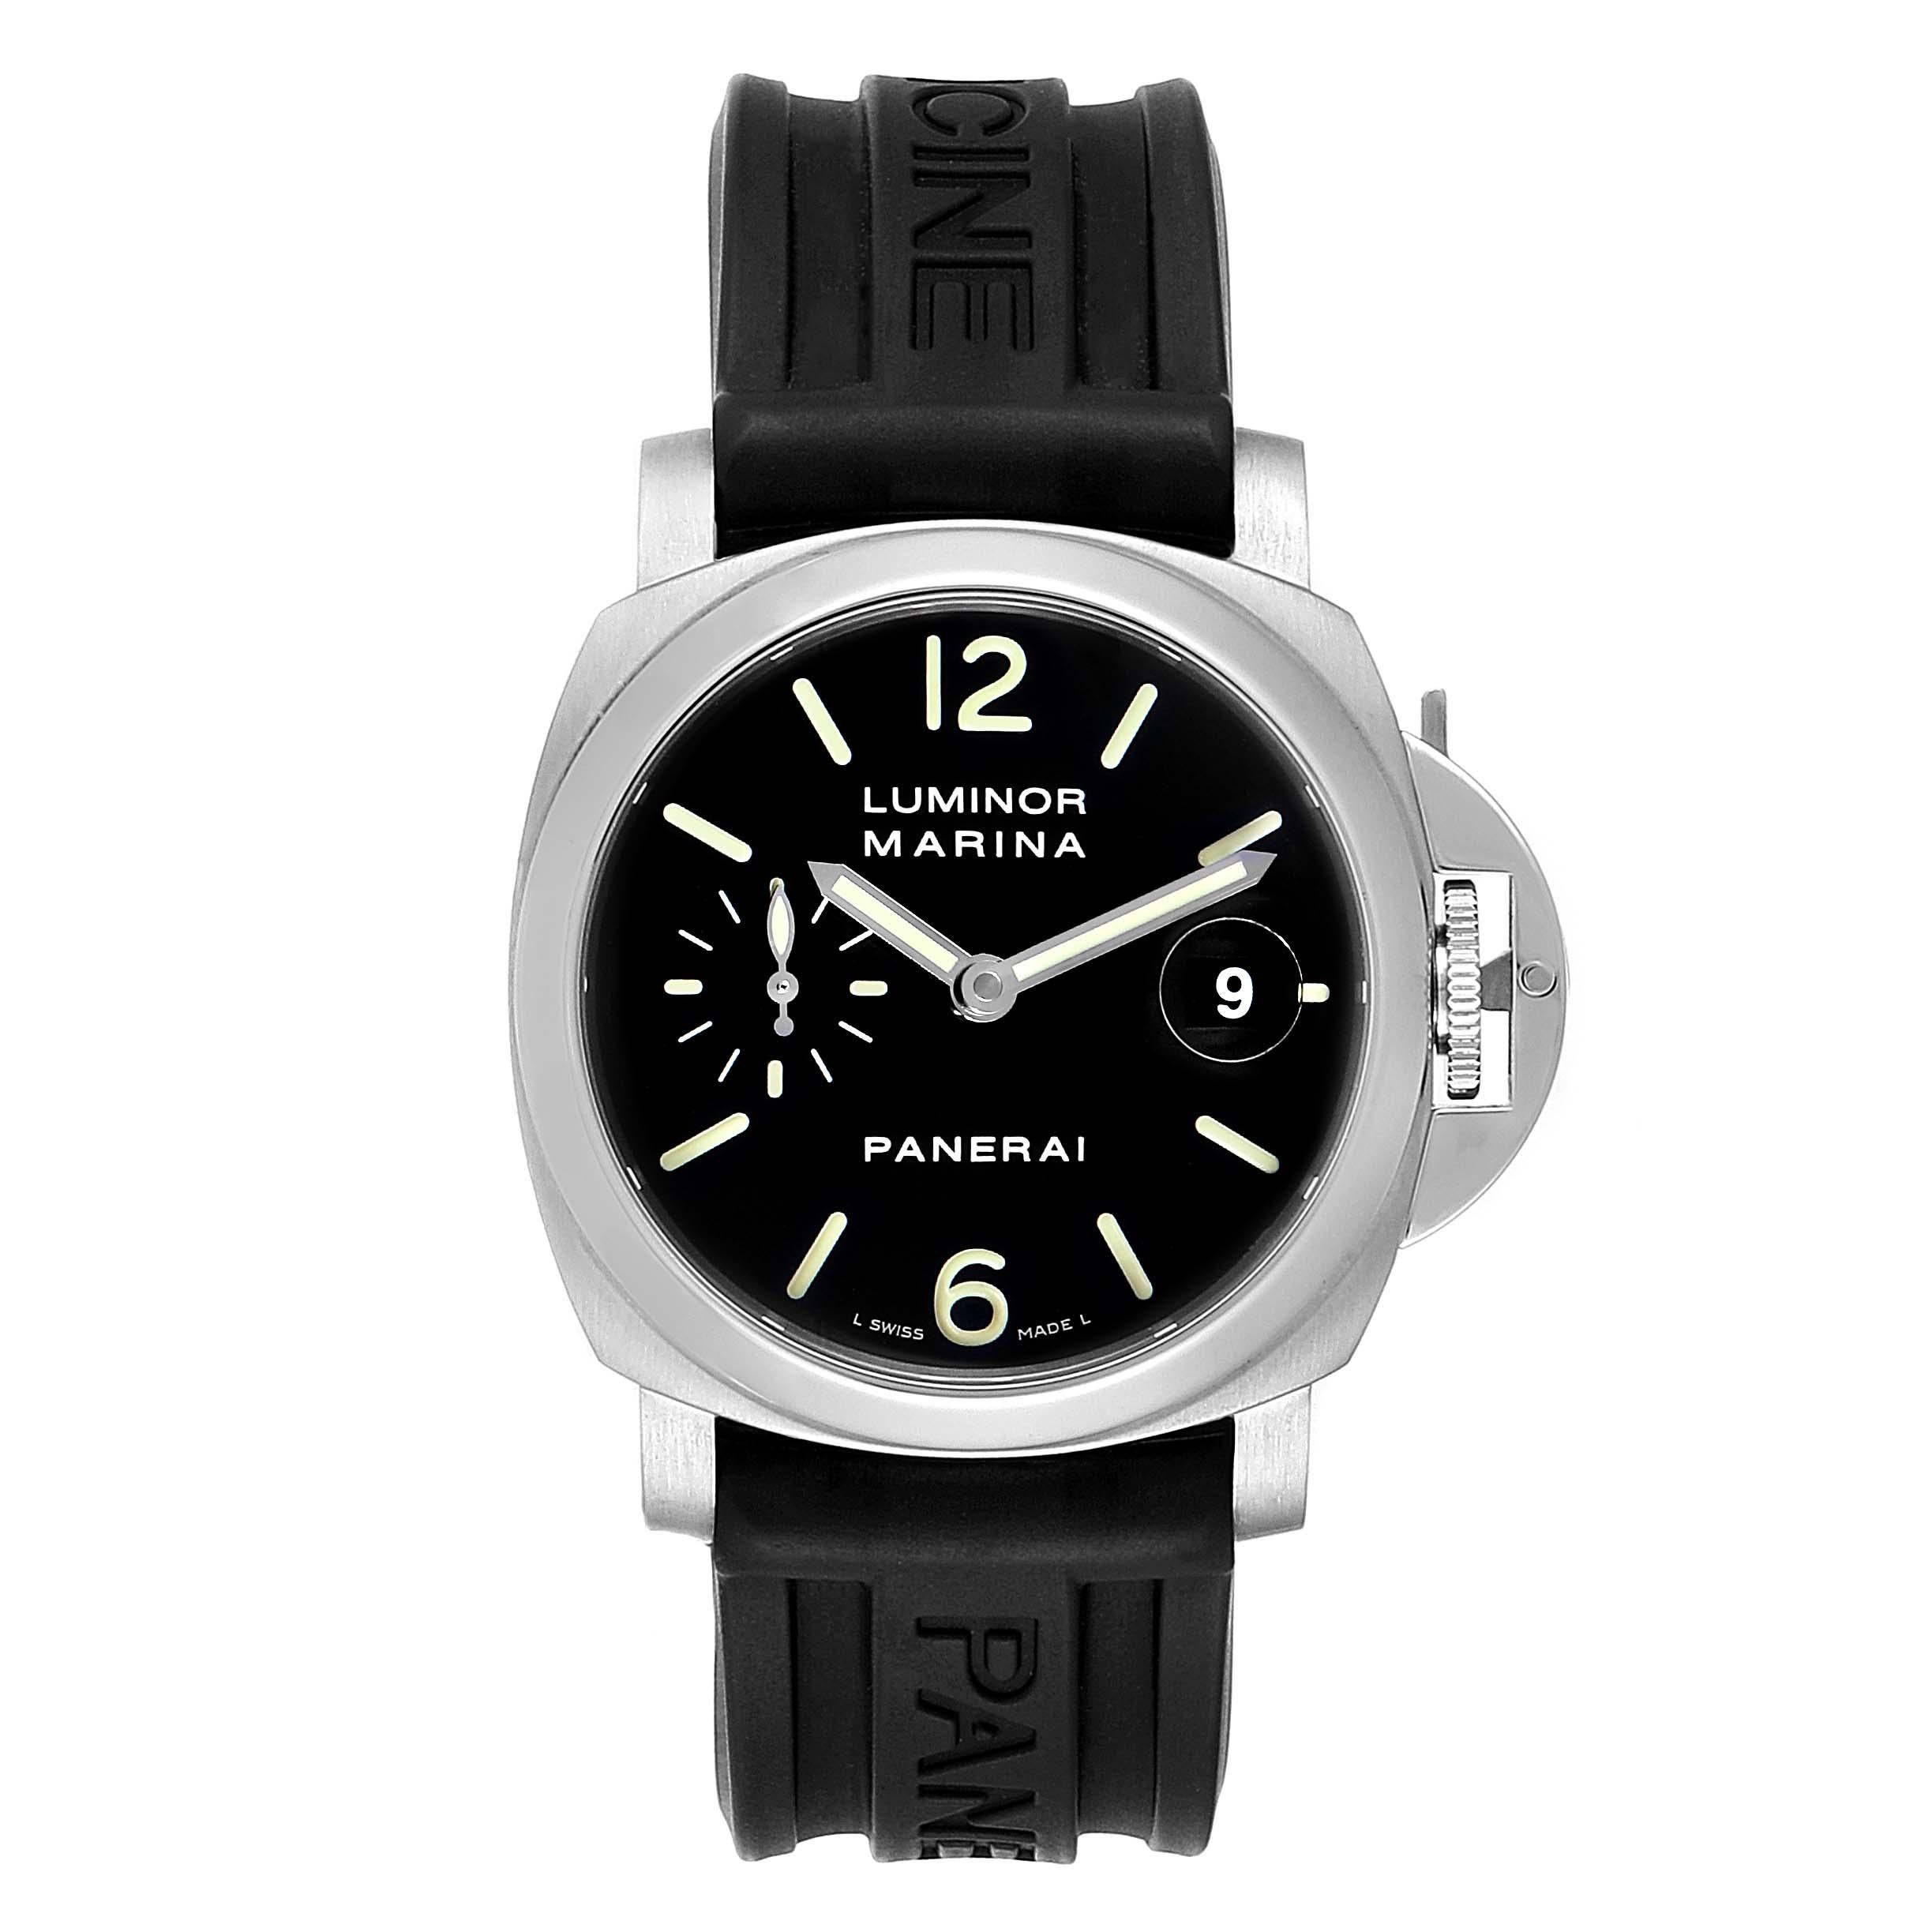 Panerai Luminor Marina Automatic 40mm Watch PAM048 PAM00048. Automatic self-winding movement. Two part cushion shaped stainless steel case 40.0 mm in diameter. Polished Panerai patented crown protector. Polished stainless steel sloped bezel. Scratch